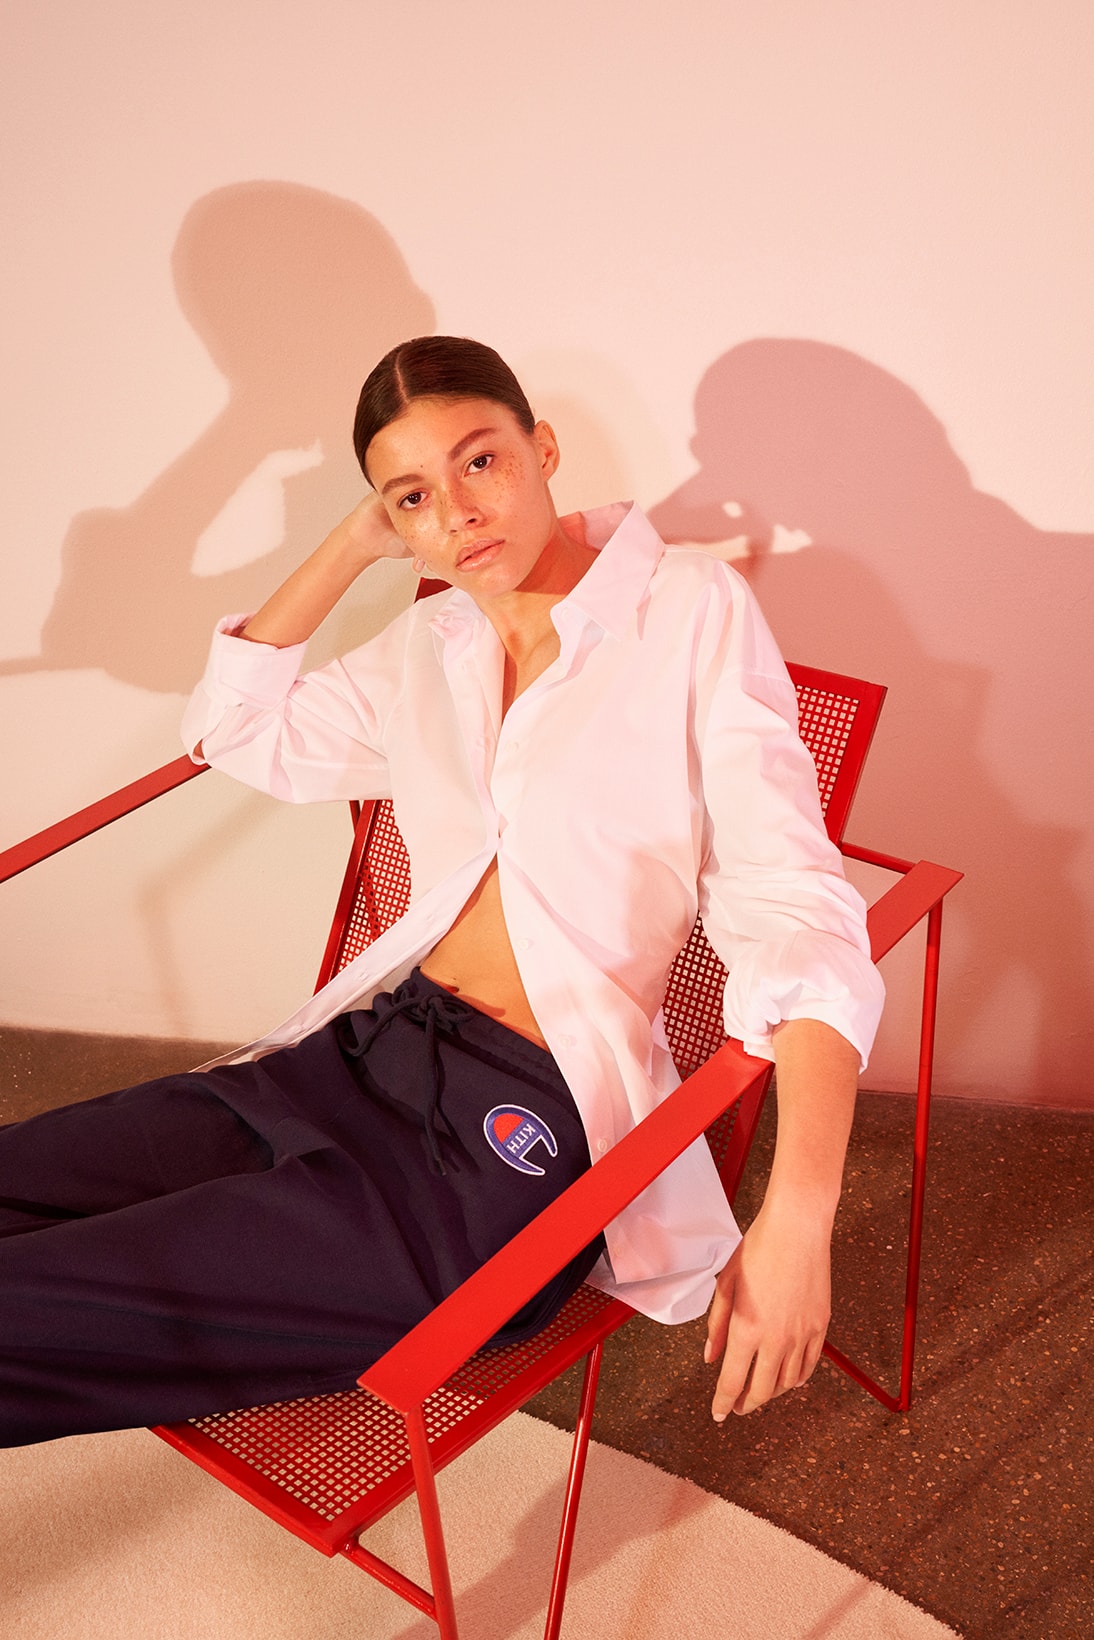 kith womens champion collaboration collection oversized sweatshirt logo hoodie cropped t-shirt 90s track jacket pants where to buy net-a-porter